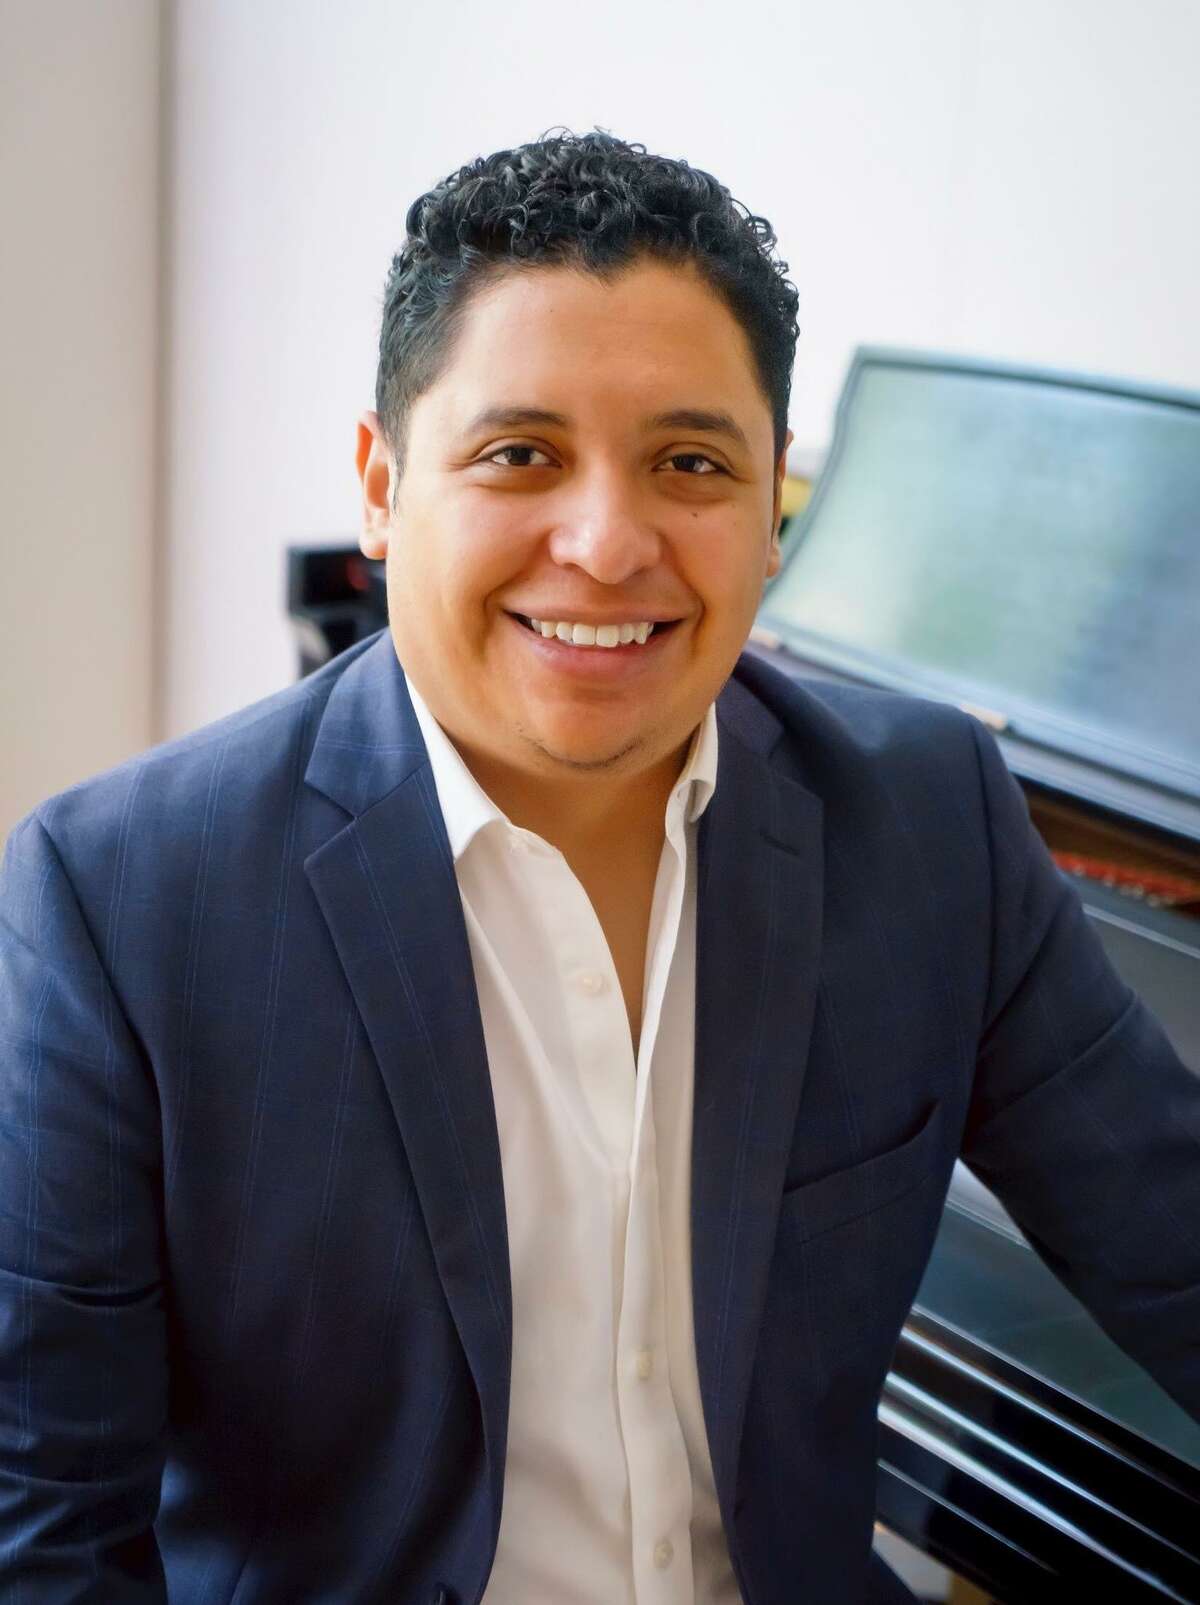 Yale Opera tenor Luis Aguilar will be a soloist.